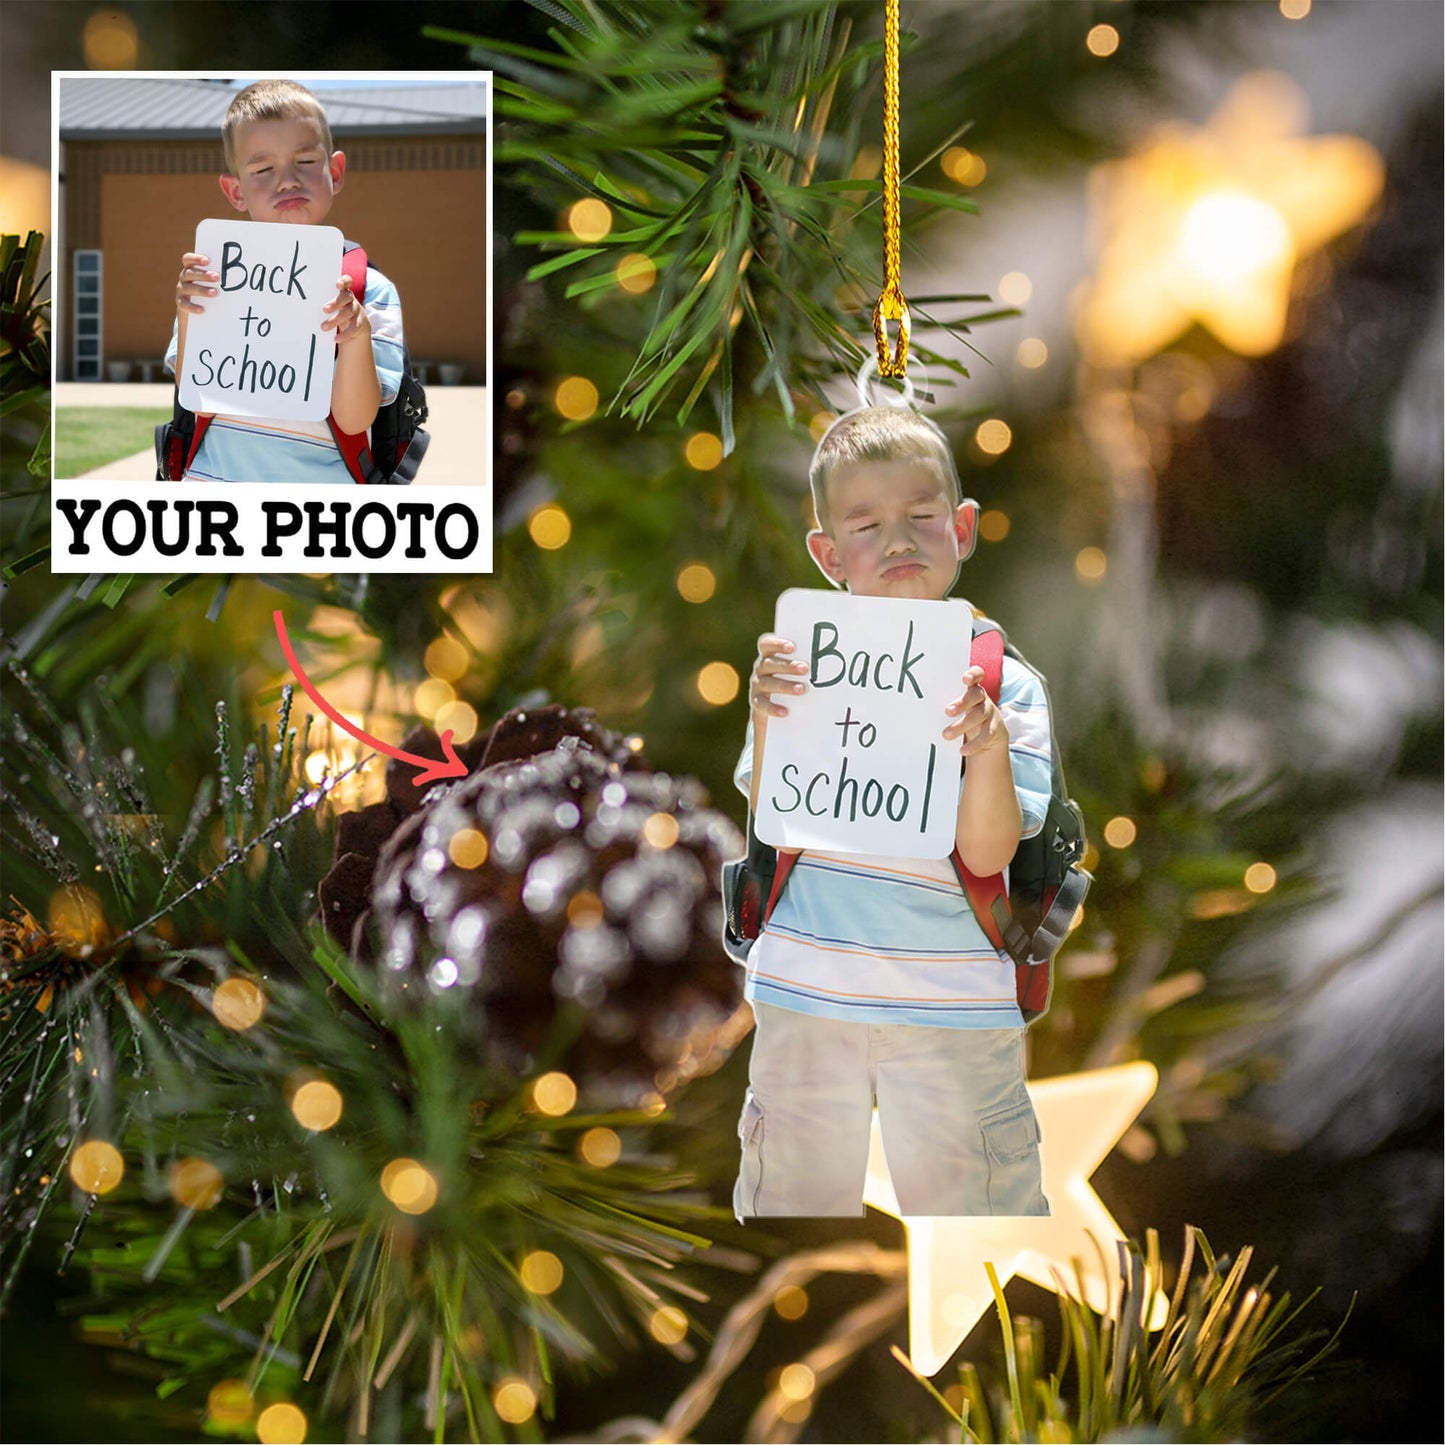 You Are Special 2 Sided Large Personalized Ornament